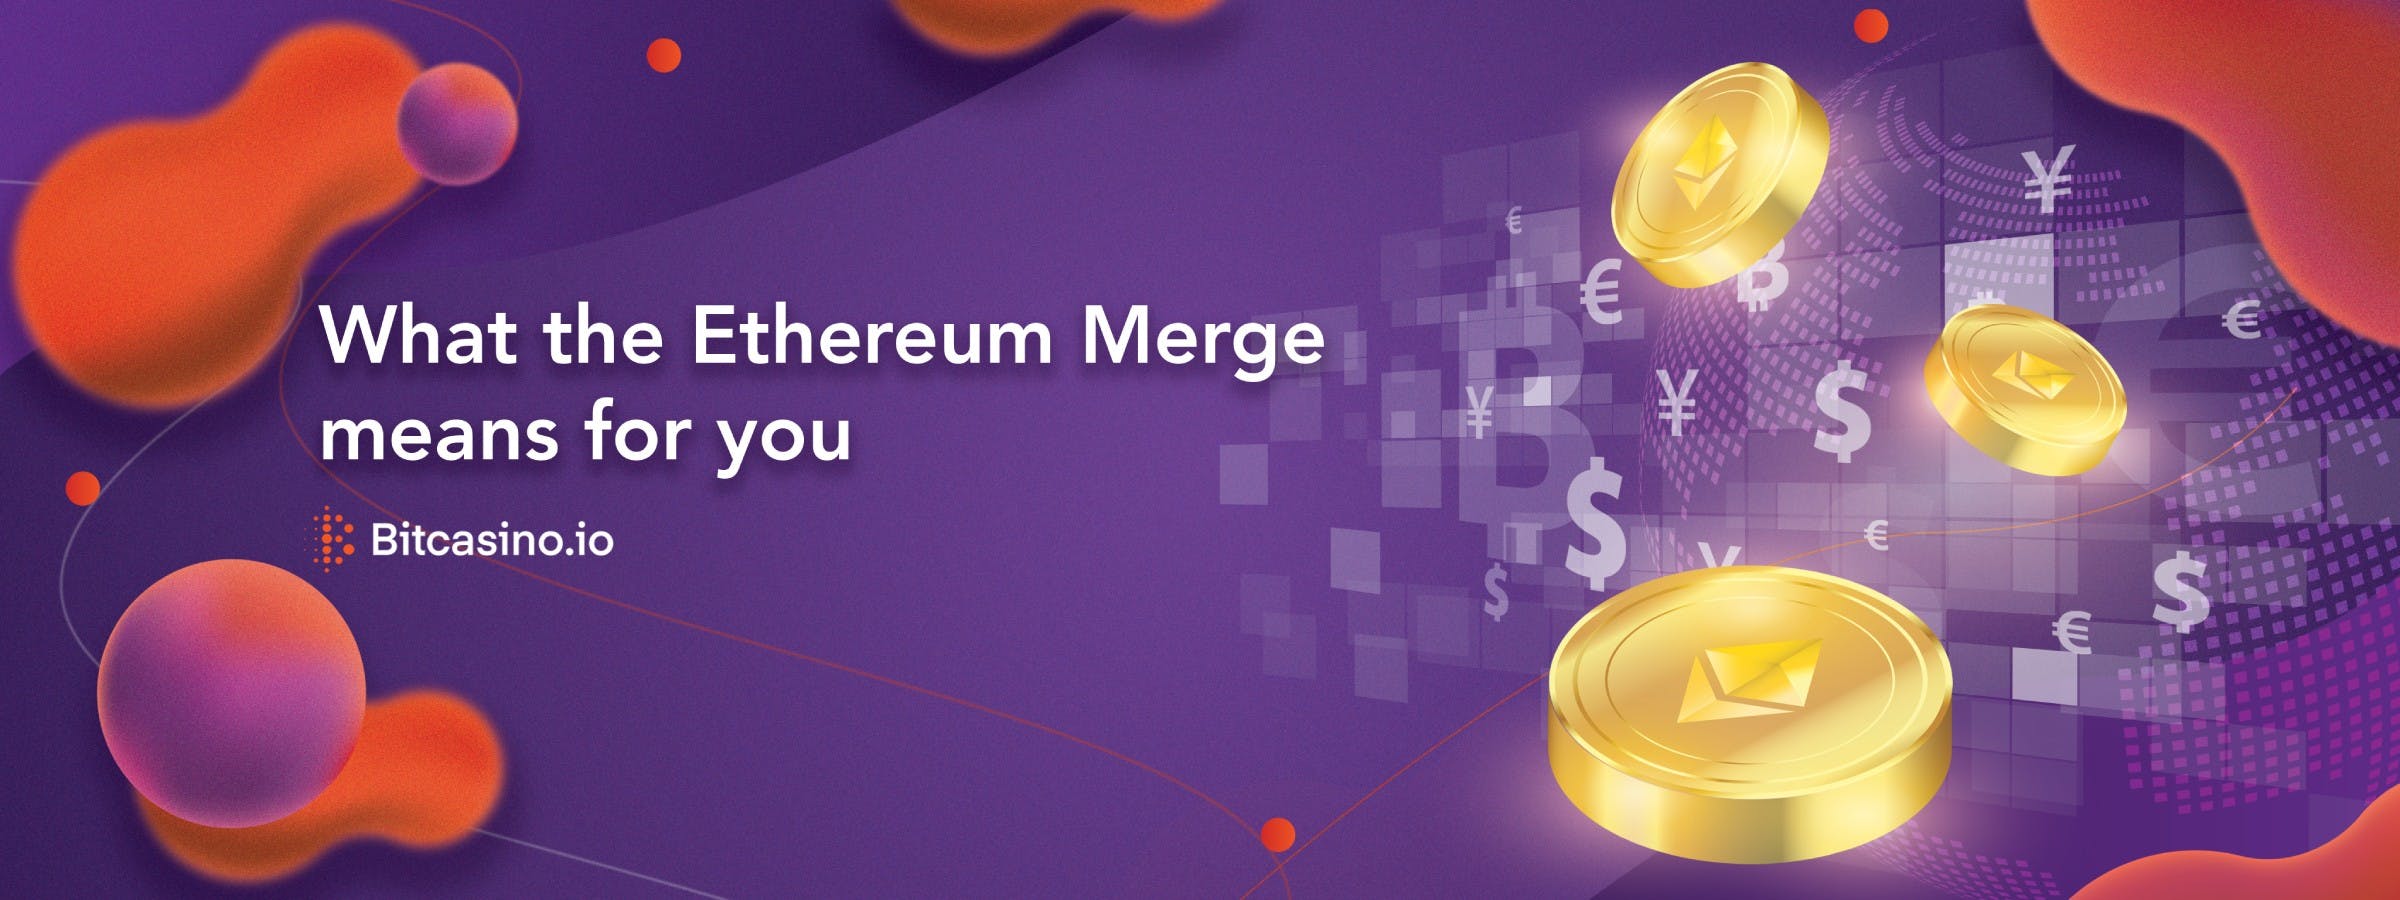 What the Ethereum Merge means for you